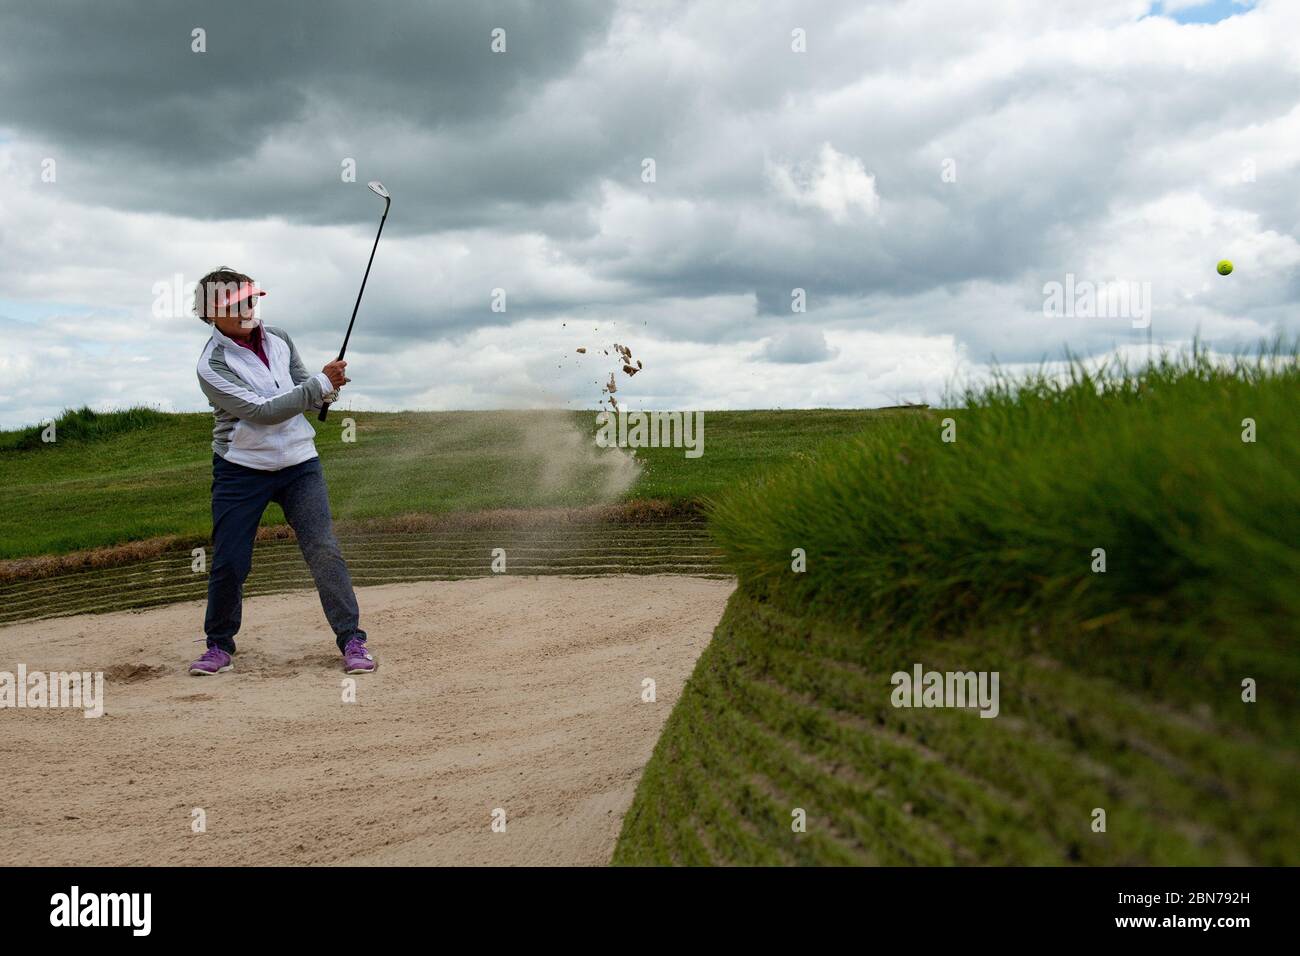 Annie Prince plays a bunker shot at Llanymynech Golf Club, Oswestry, where the course crosses the border of England and Wales. The course faces uncertainty as lockdown restrictions on golf are lifted in England from today, but remain in force in Wales. Stock Photo